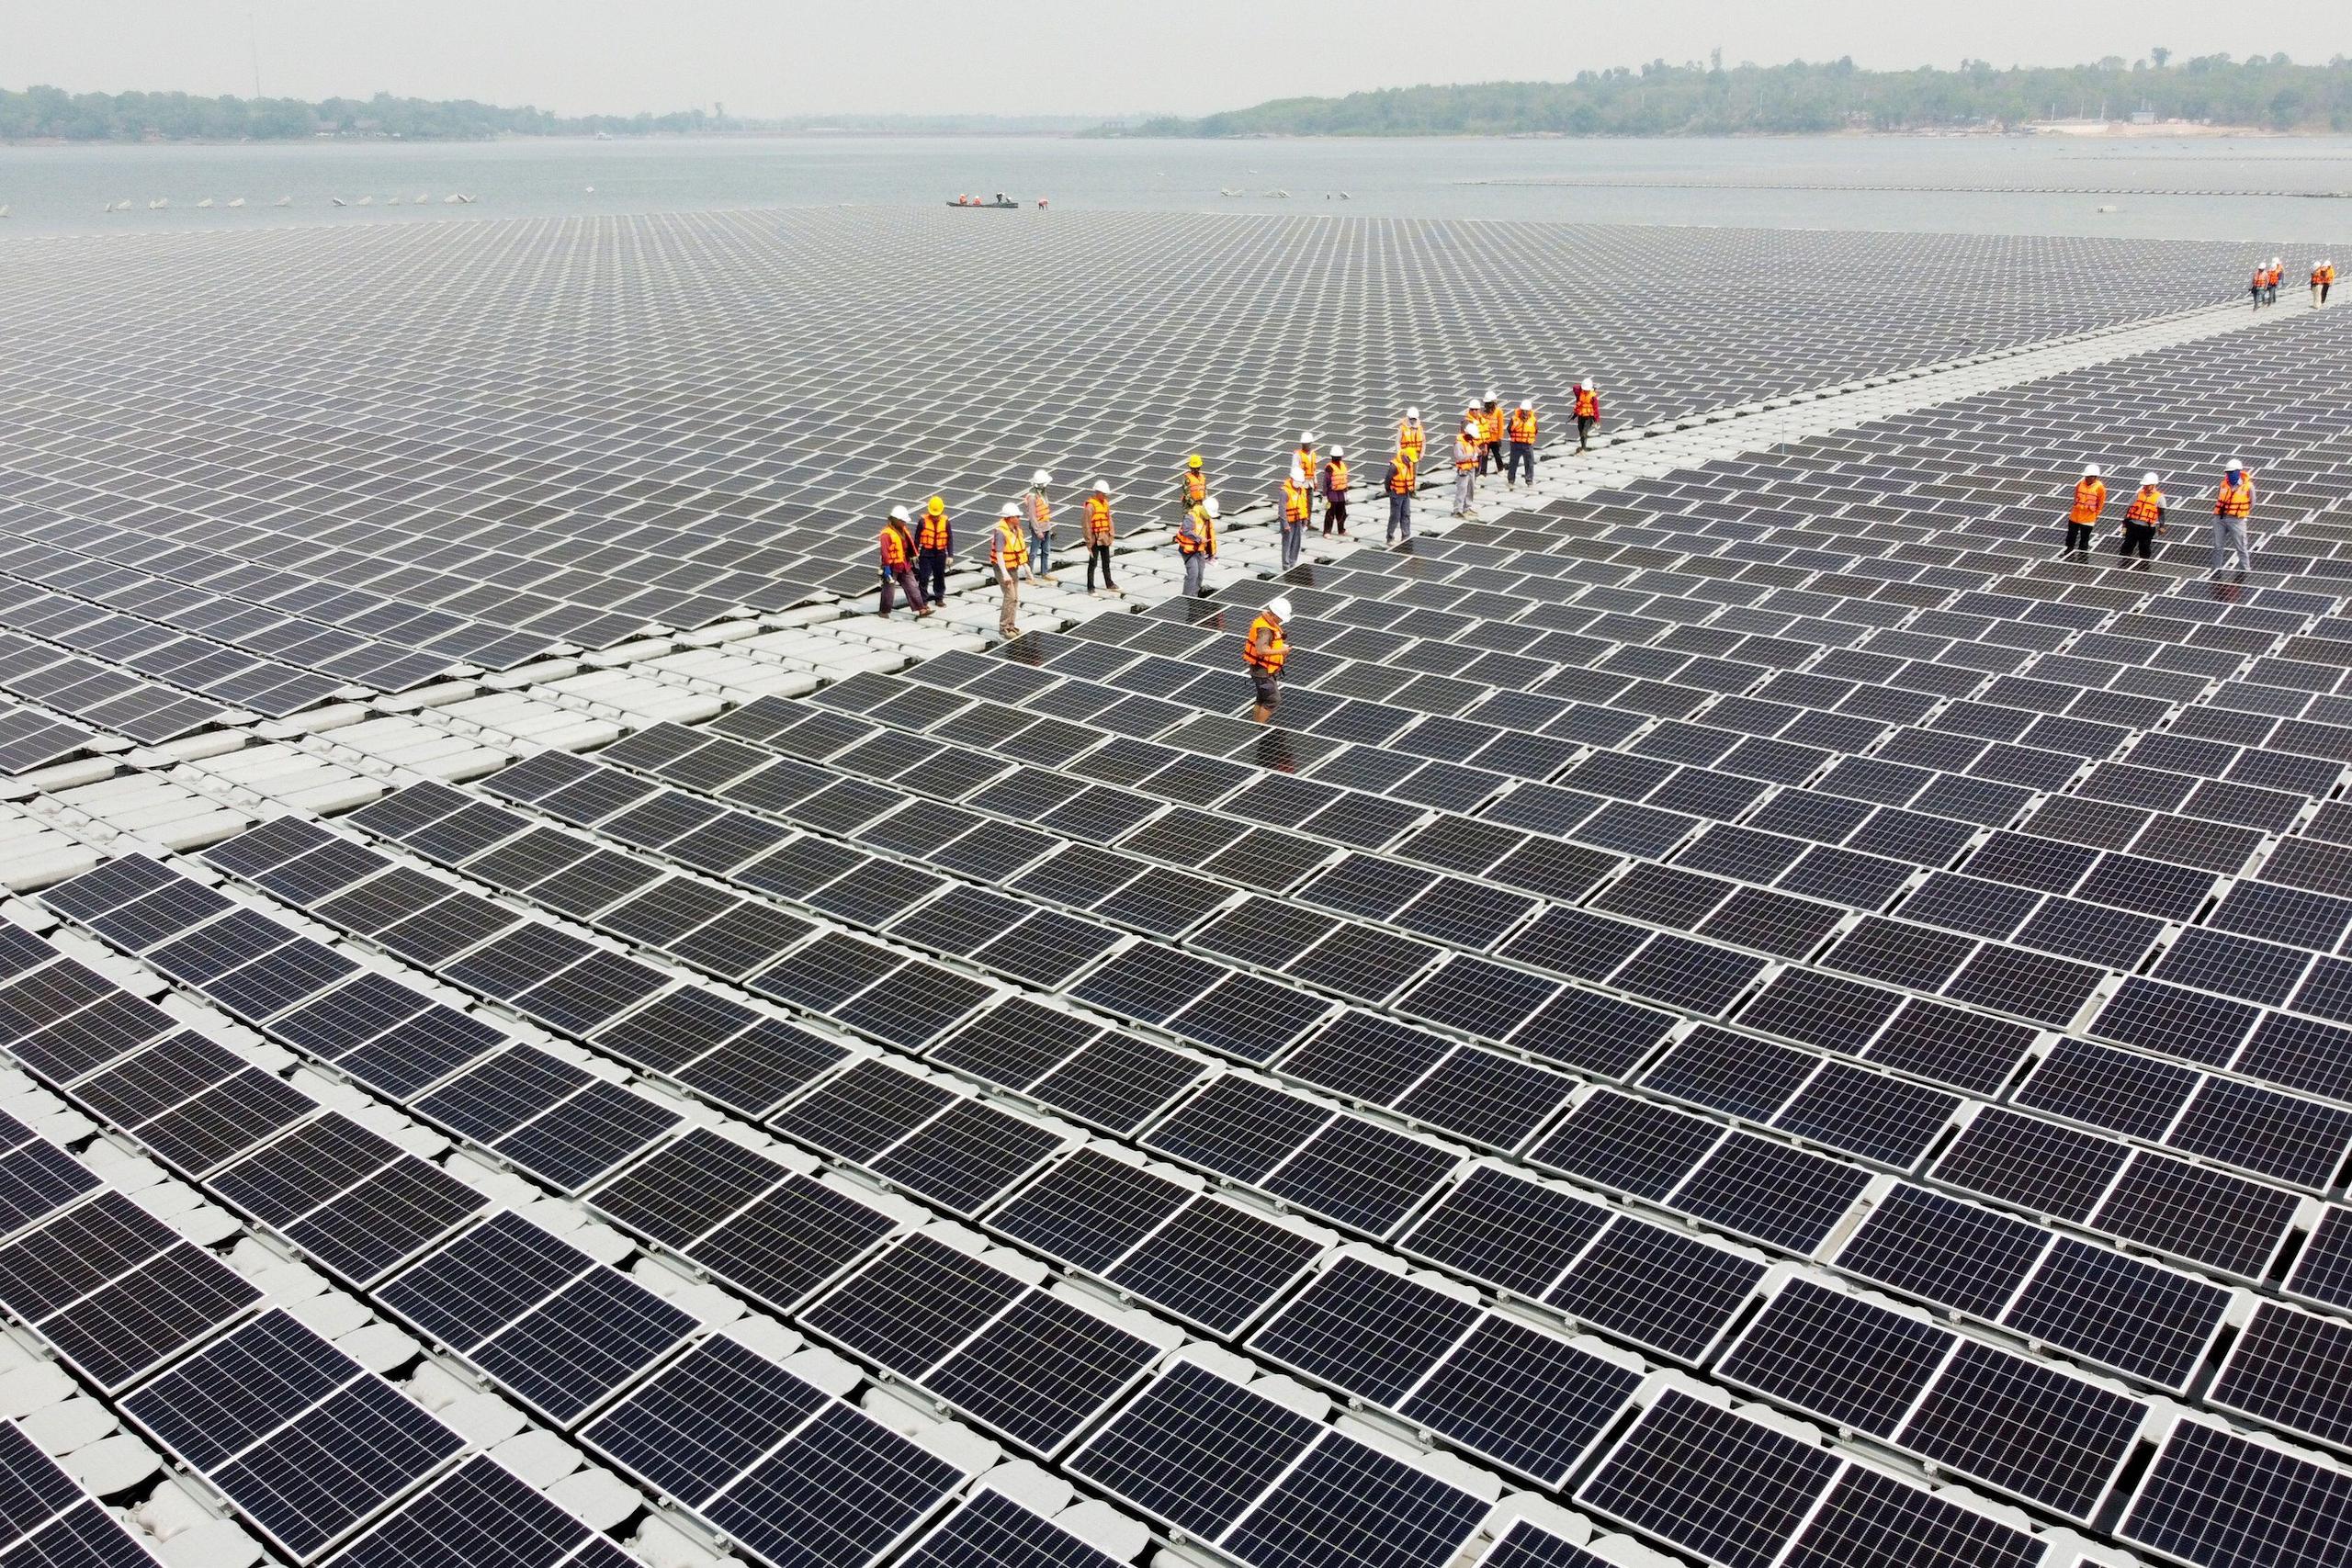 Workers walk between solar cell panels over the water surface of Sirindhorn Dam, Thailand